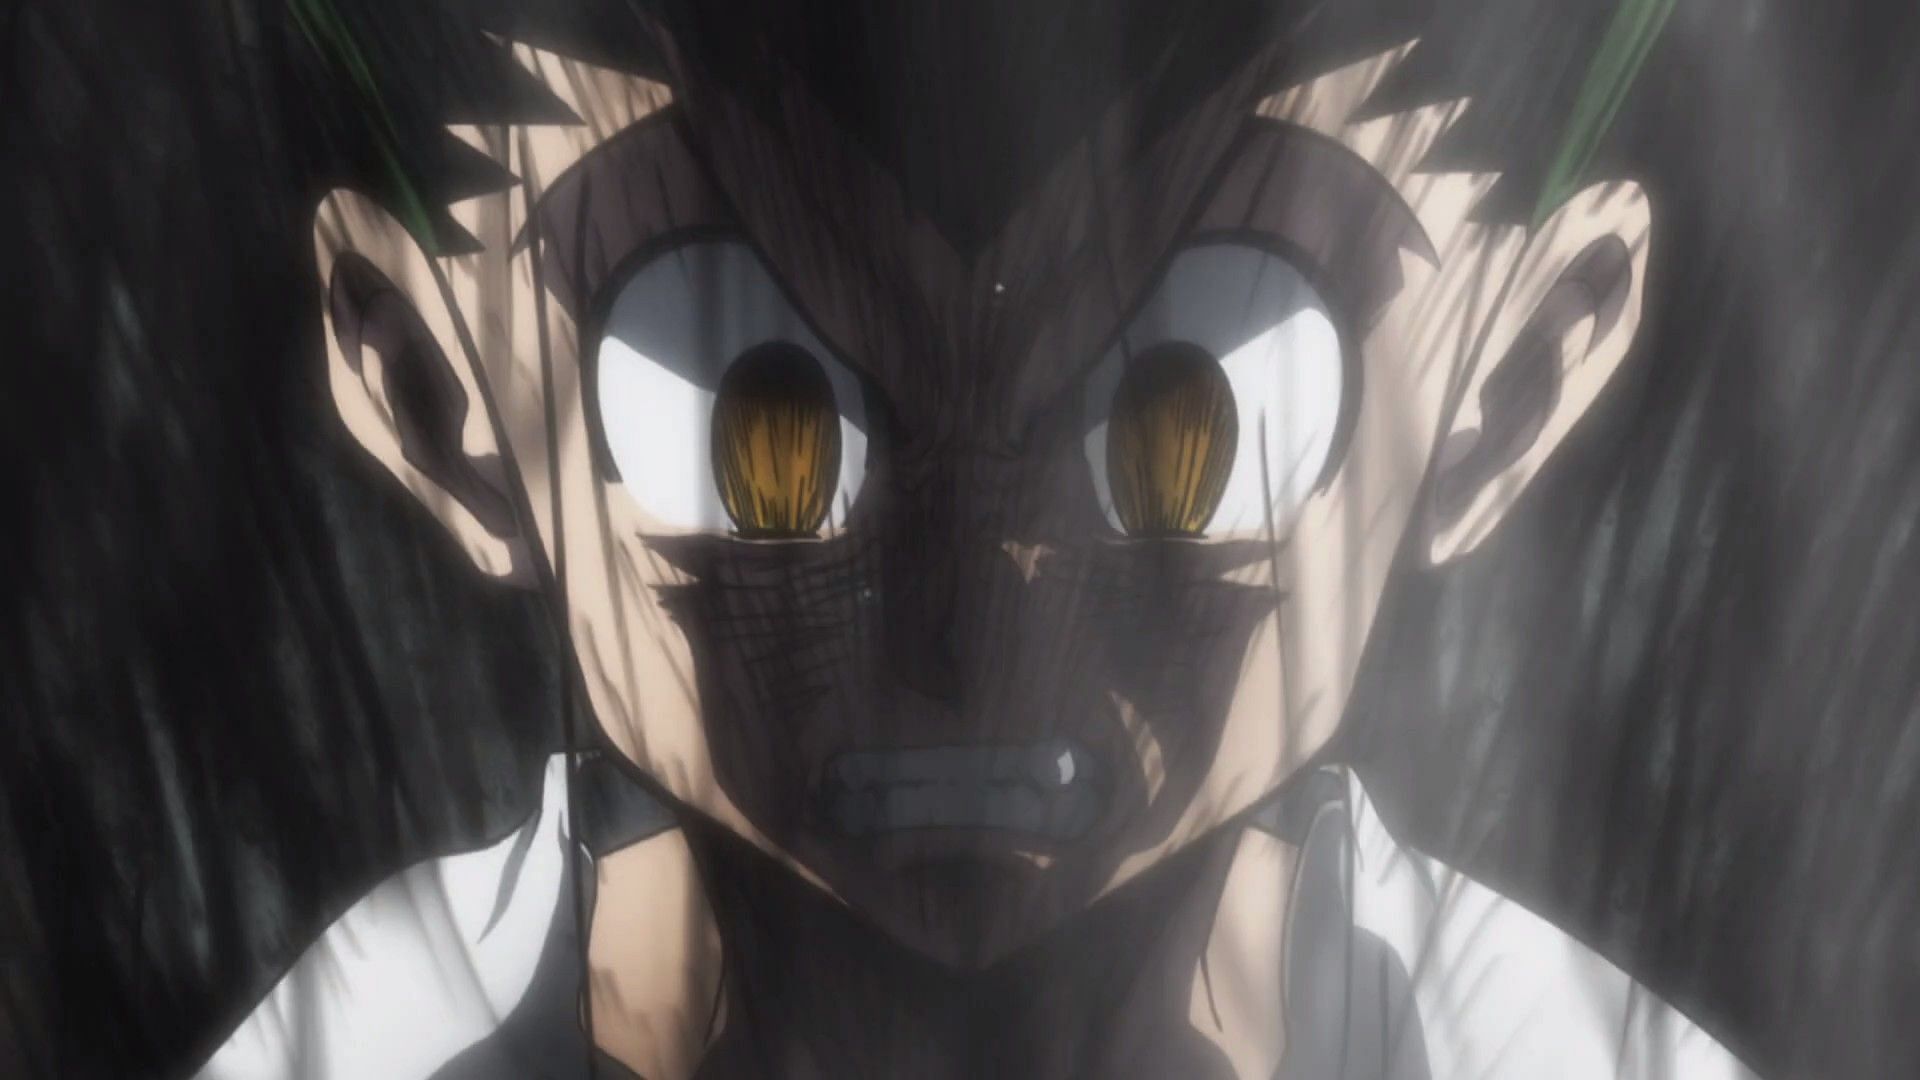 Gon can become one of the most ruthless anime characters when angered (Image via Studio Pierrot)